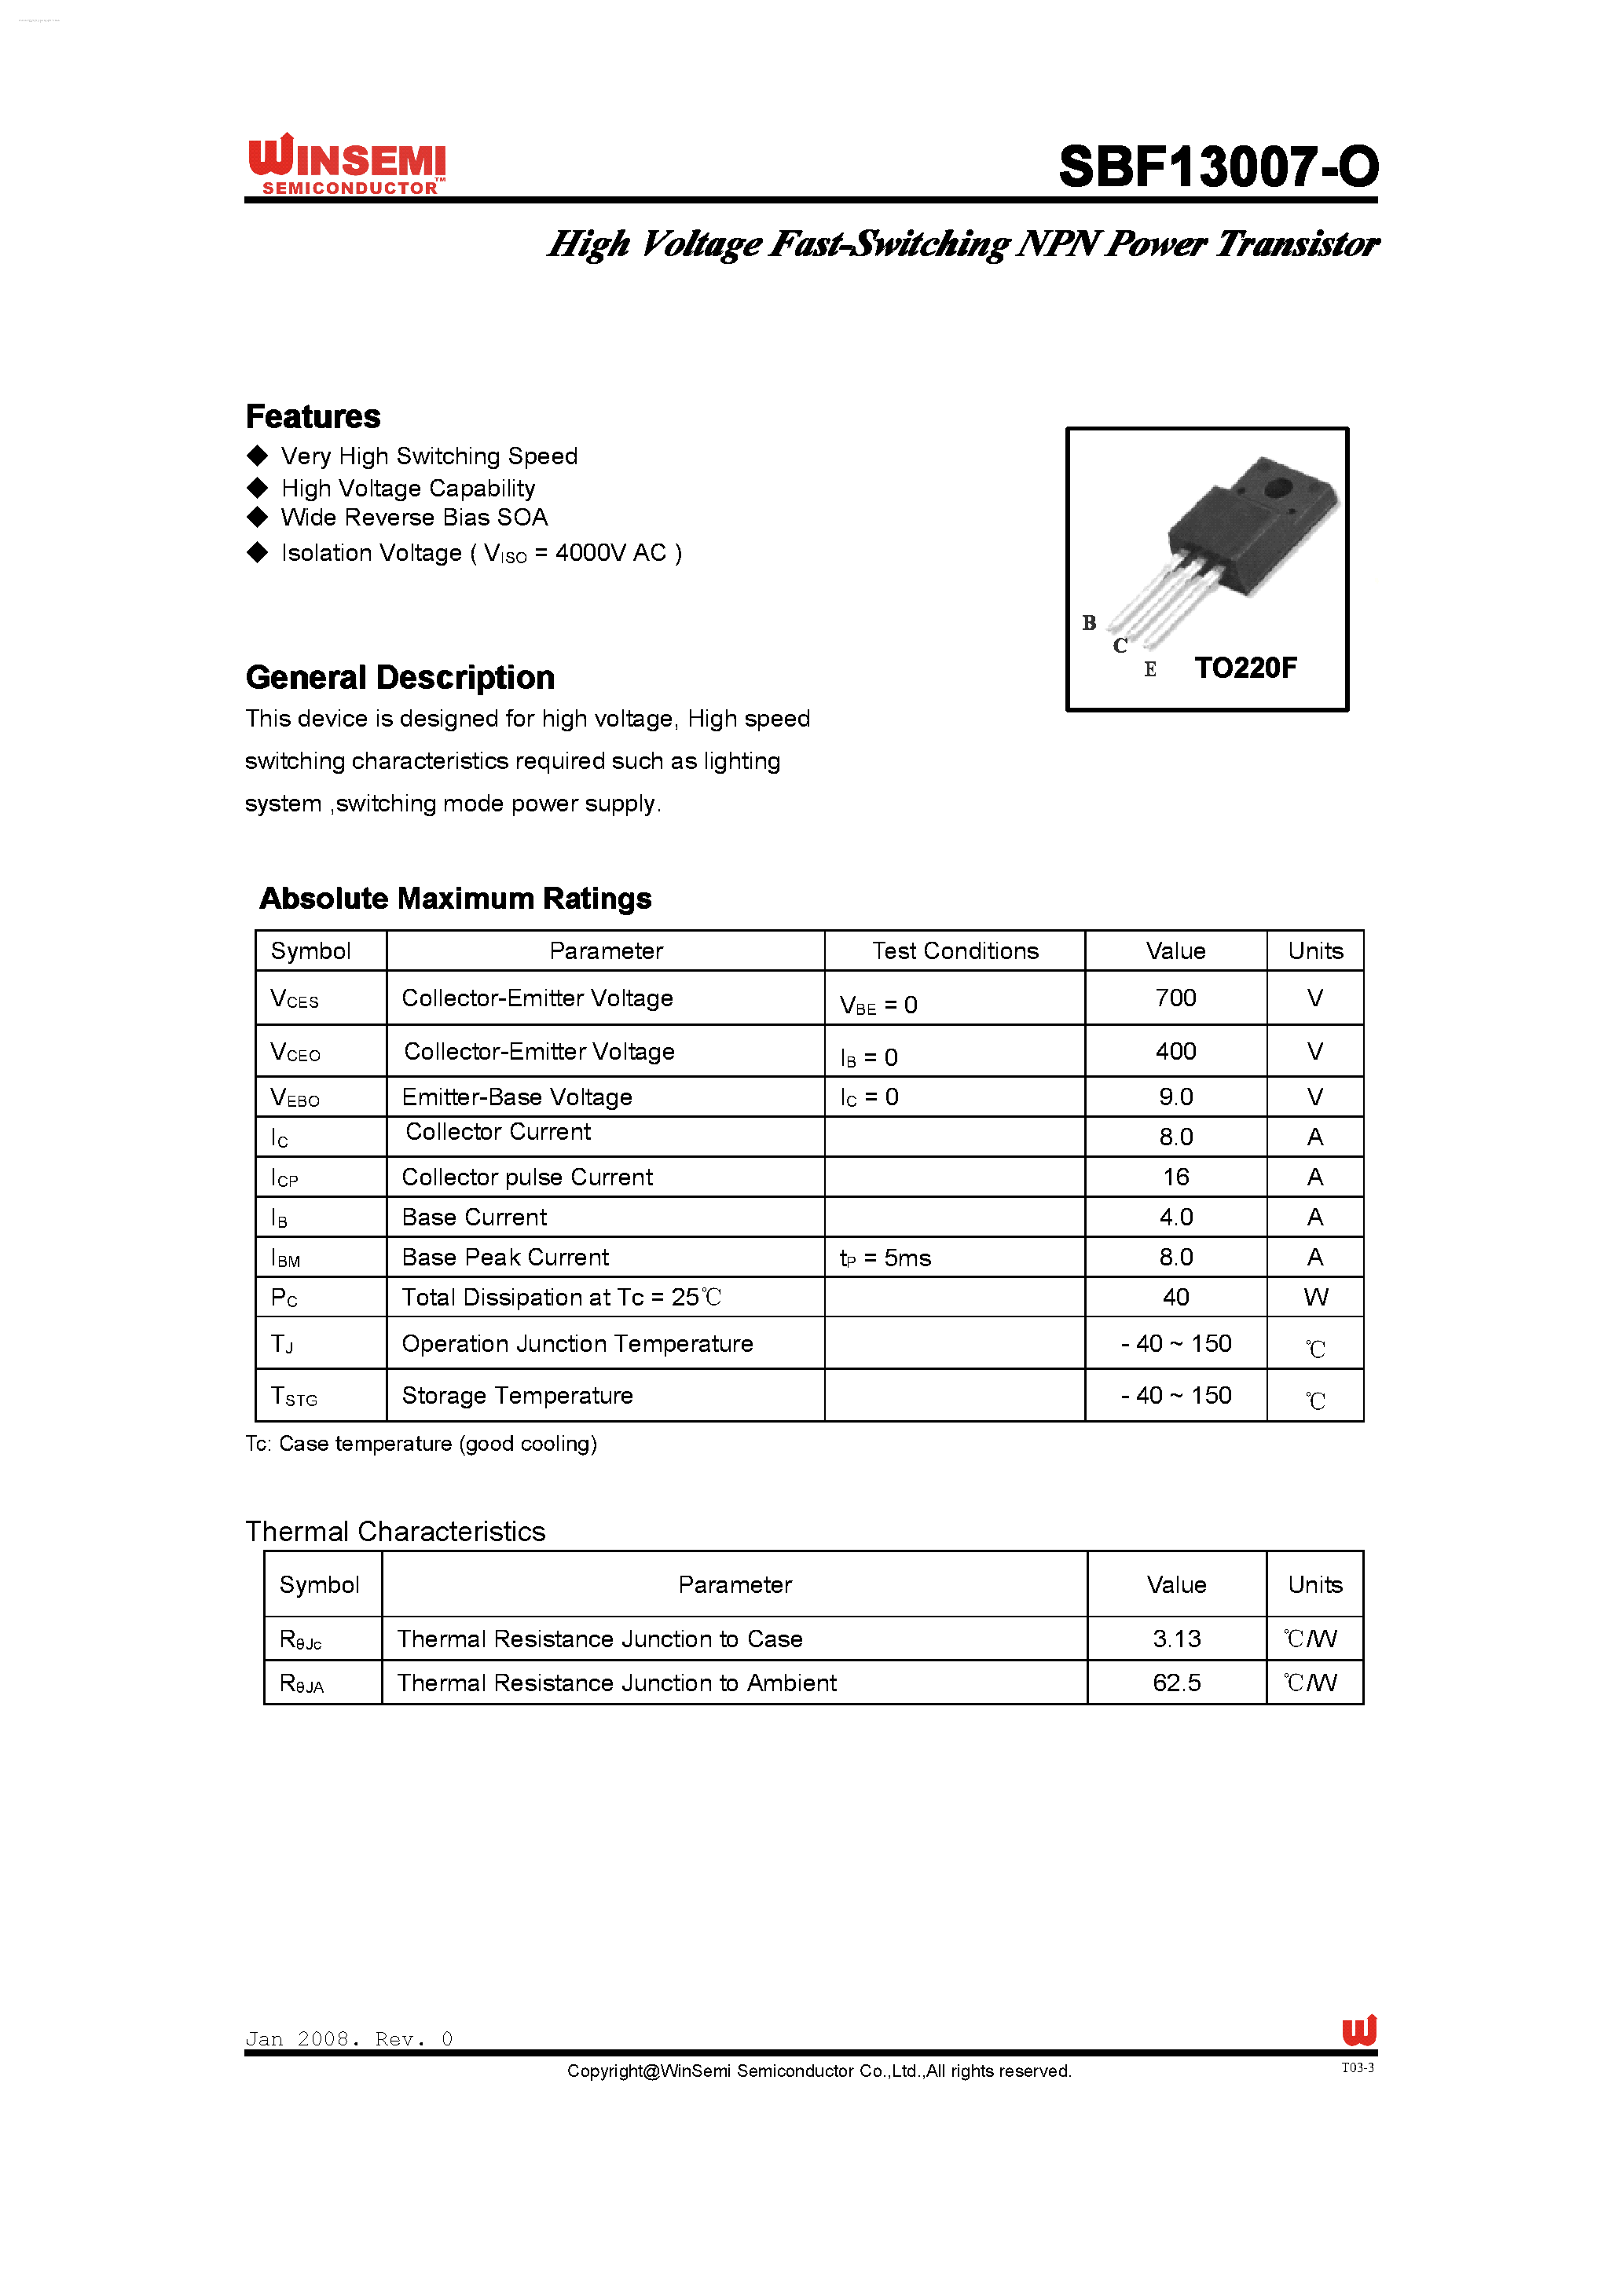 Datasheet SBF13007-O - High Voltage Fast-Switching NPN Power Transistor page 1